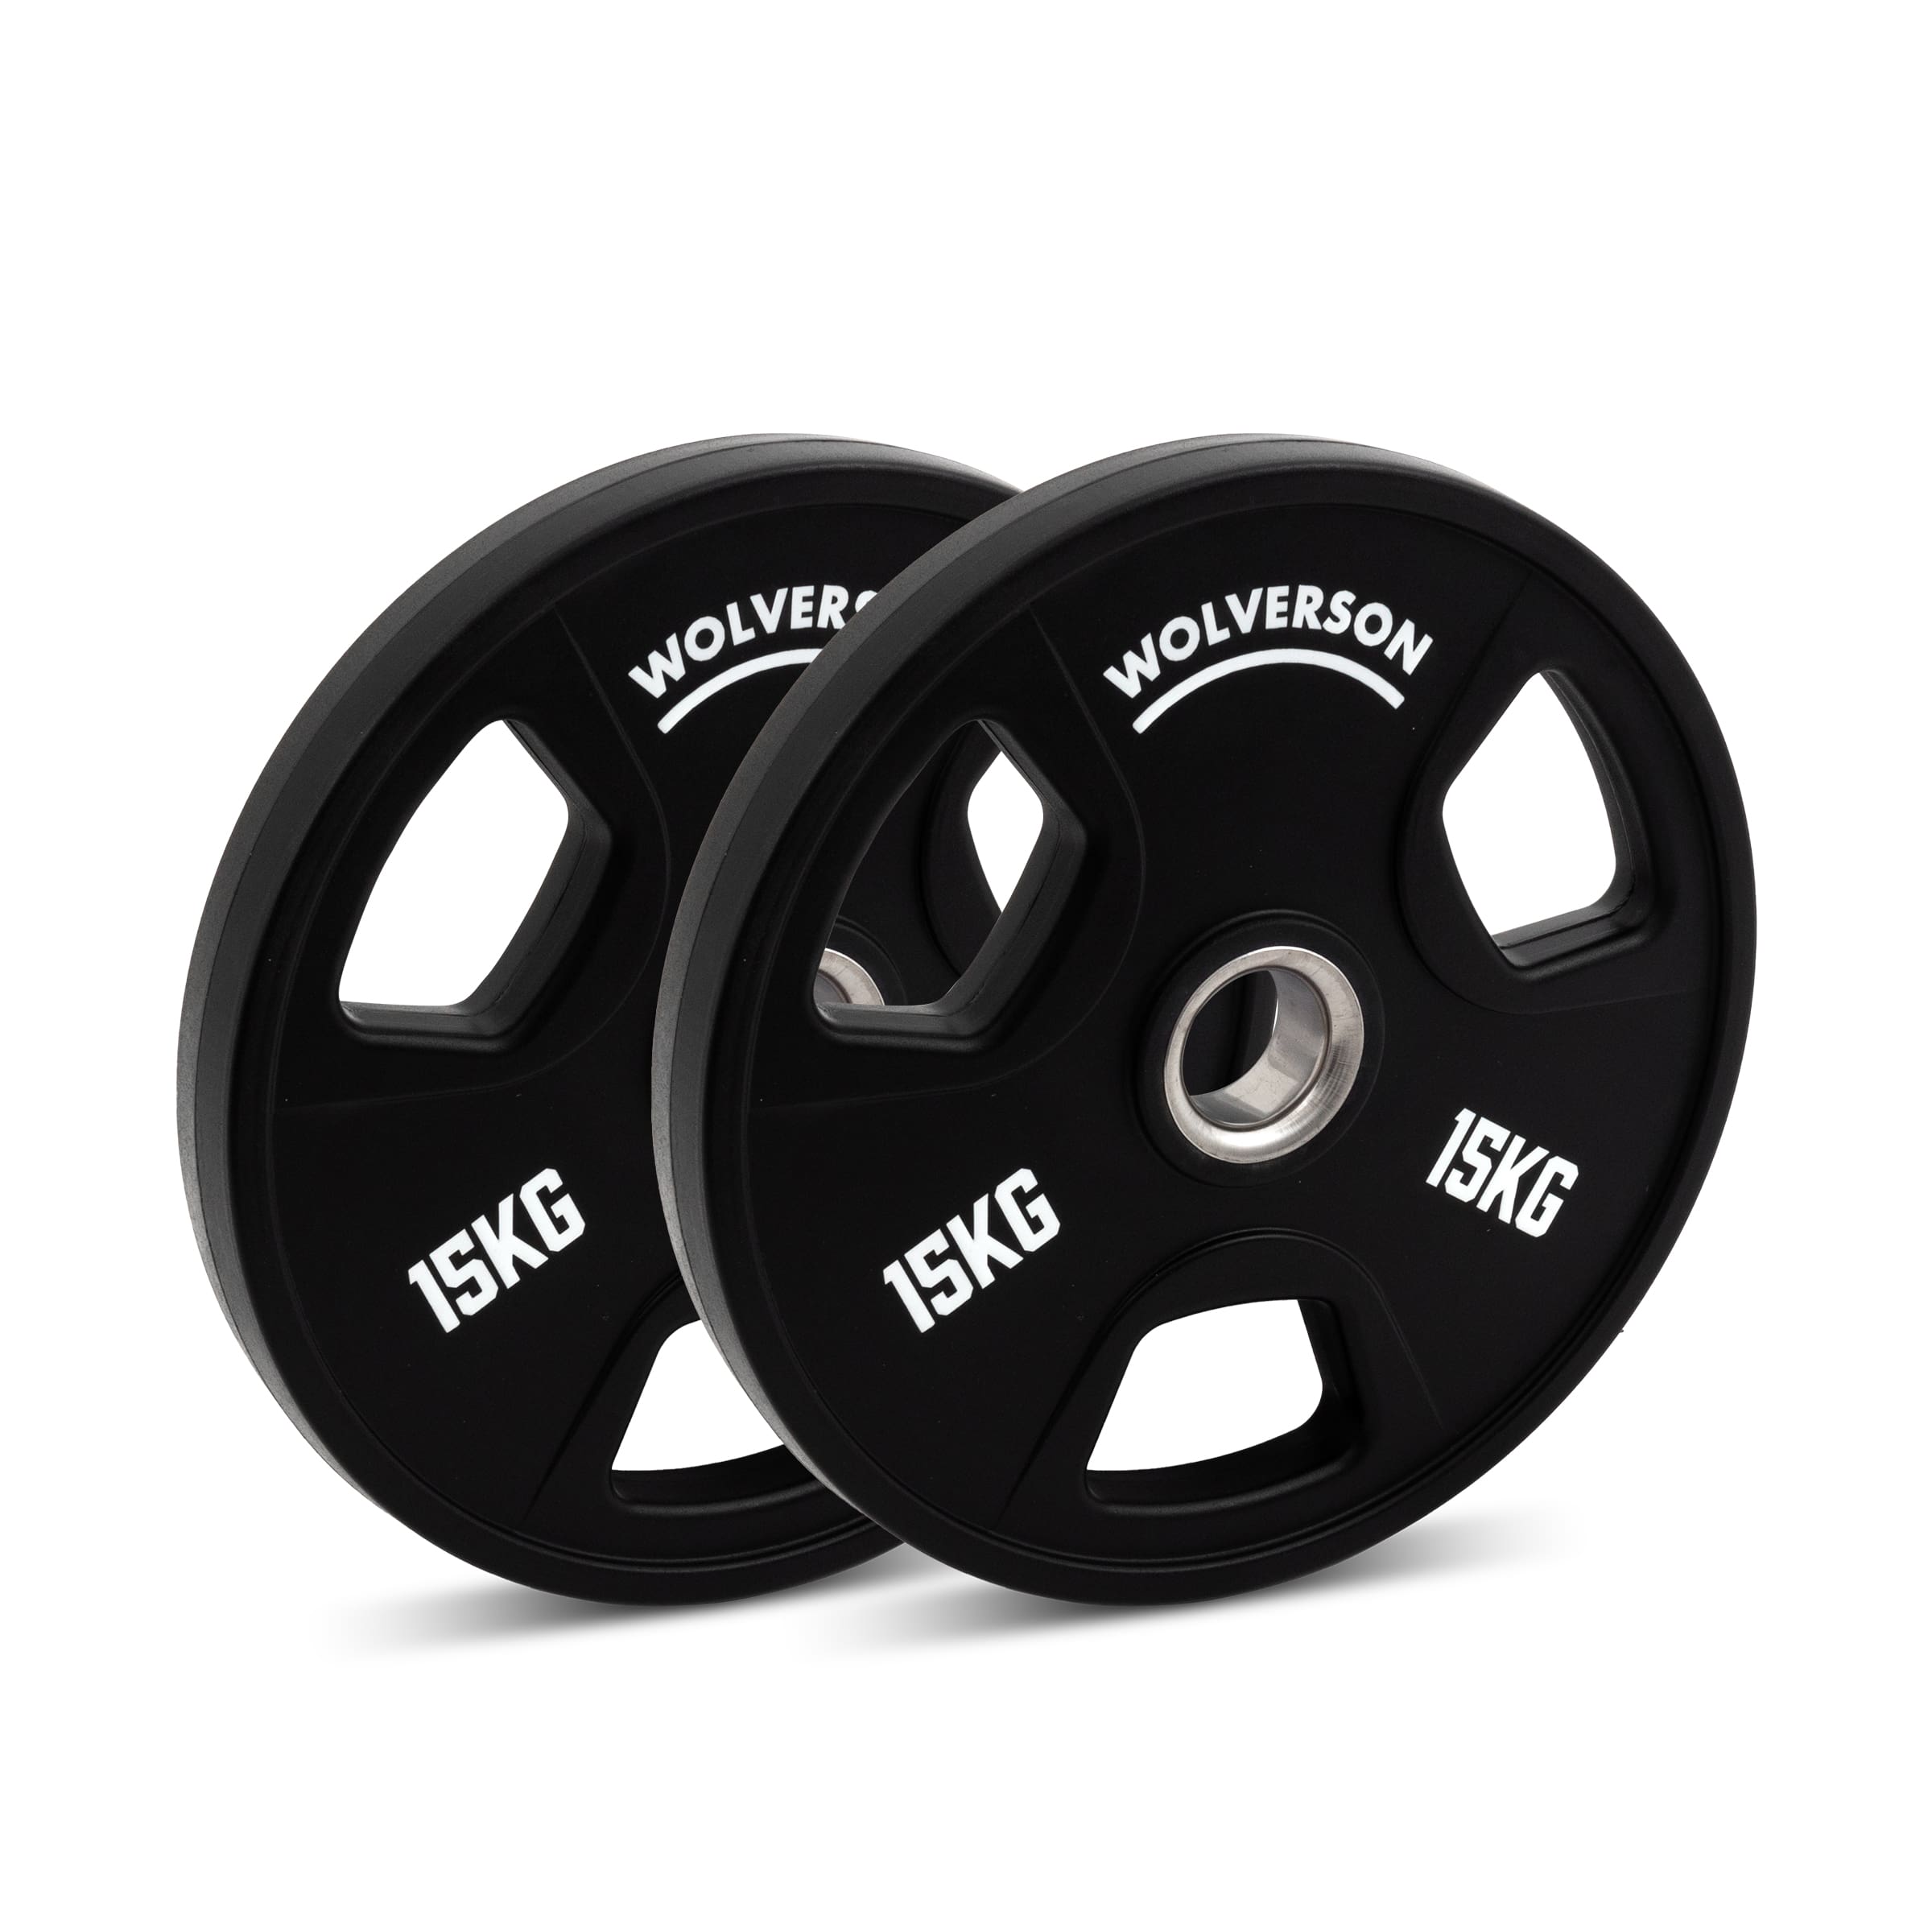 Wolverson Tri-Grip PU Olympic Weight Plates